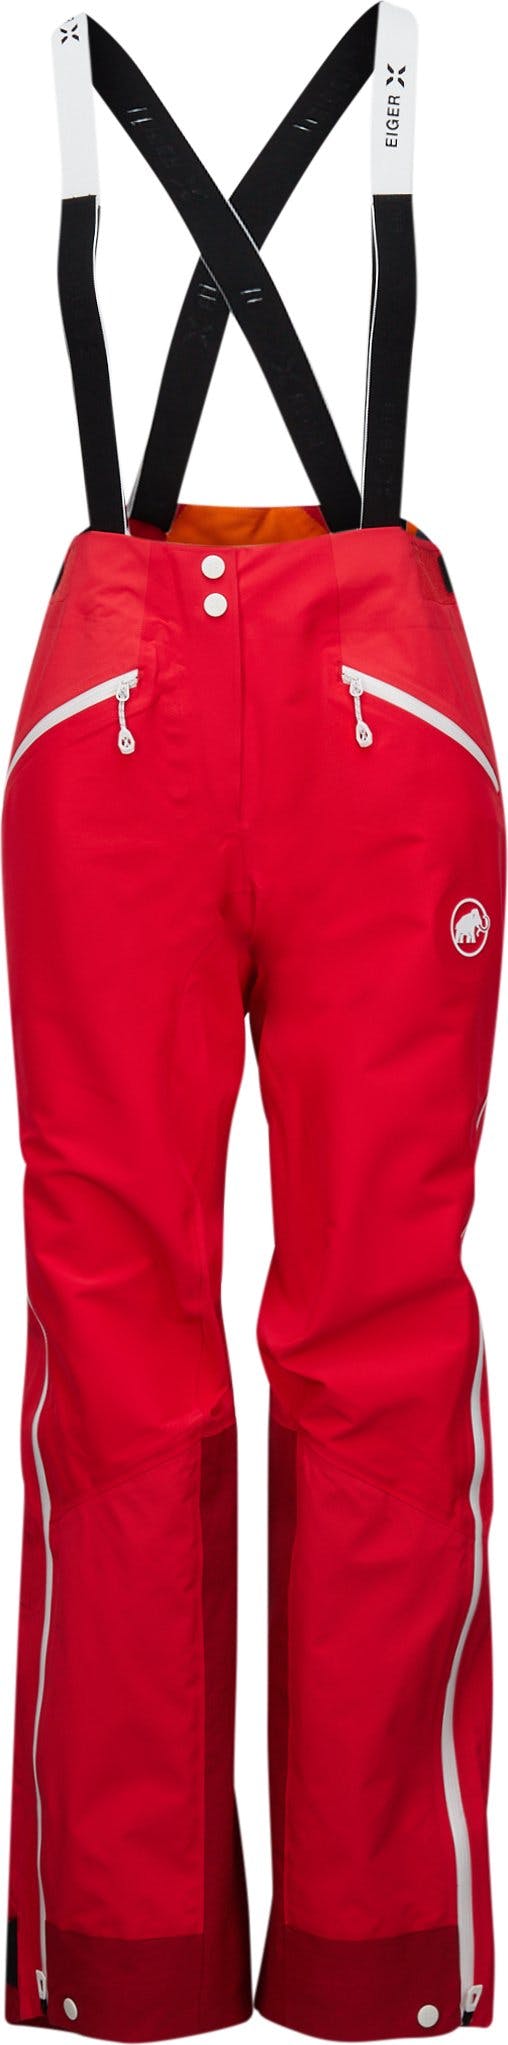 Product image for Nordwand Pro HS Pants - Women's